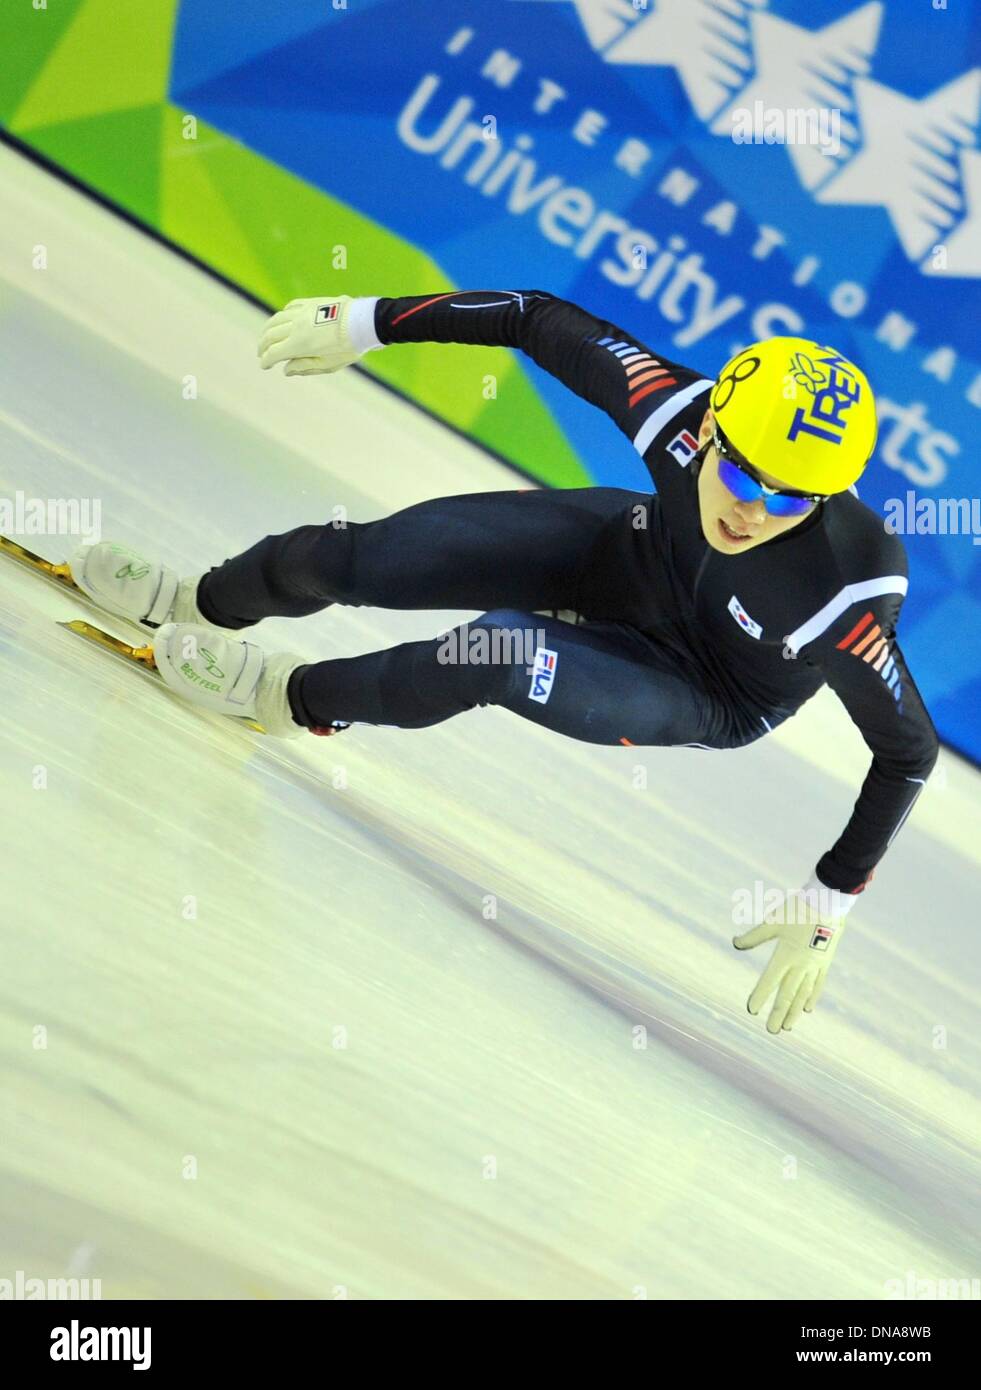 Trentino, Italy. 20th Dec, 2013. South Korea's Noh Jinkyu competes during the men's short track 1,000m final at the 26th Winter Universiade in Trentino, Italy, Dec. 20, 2013. Noh Jinkyu claimed the title with 1 minute and 25.506 seconds. Credit:  He Changshan/Xinhua/Alamy Live News Stock Photo